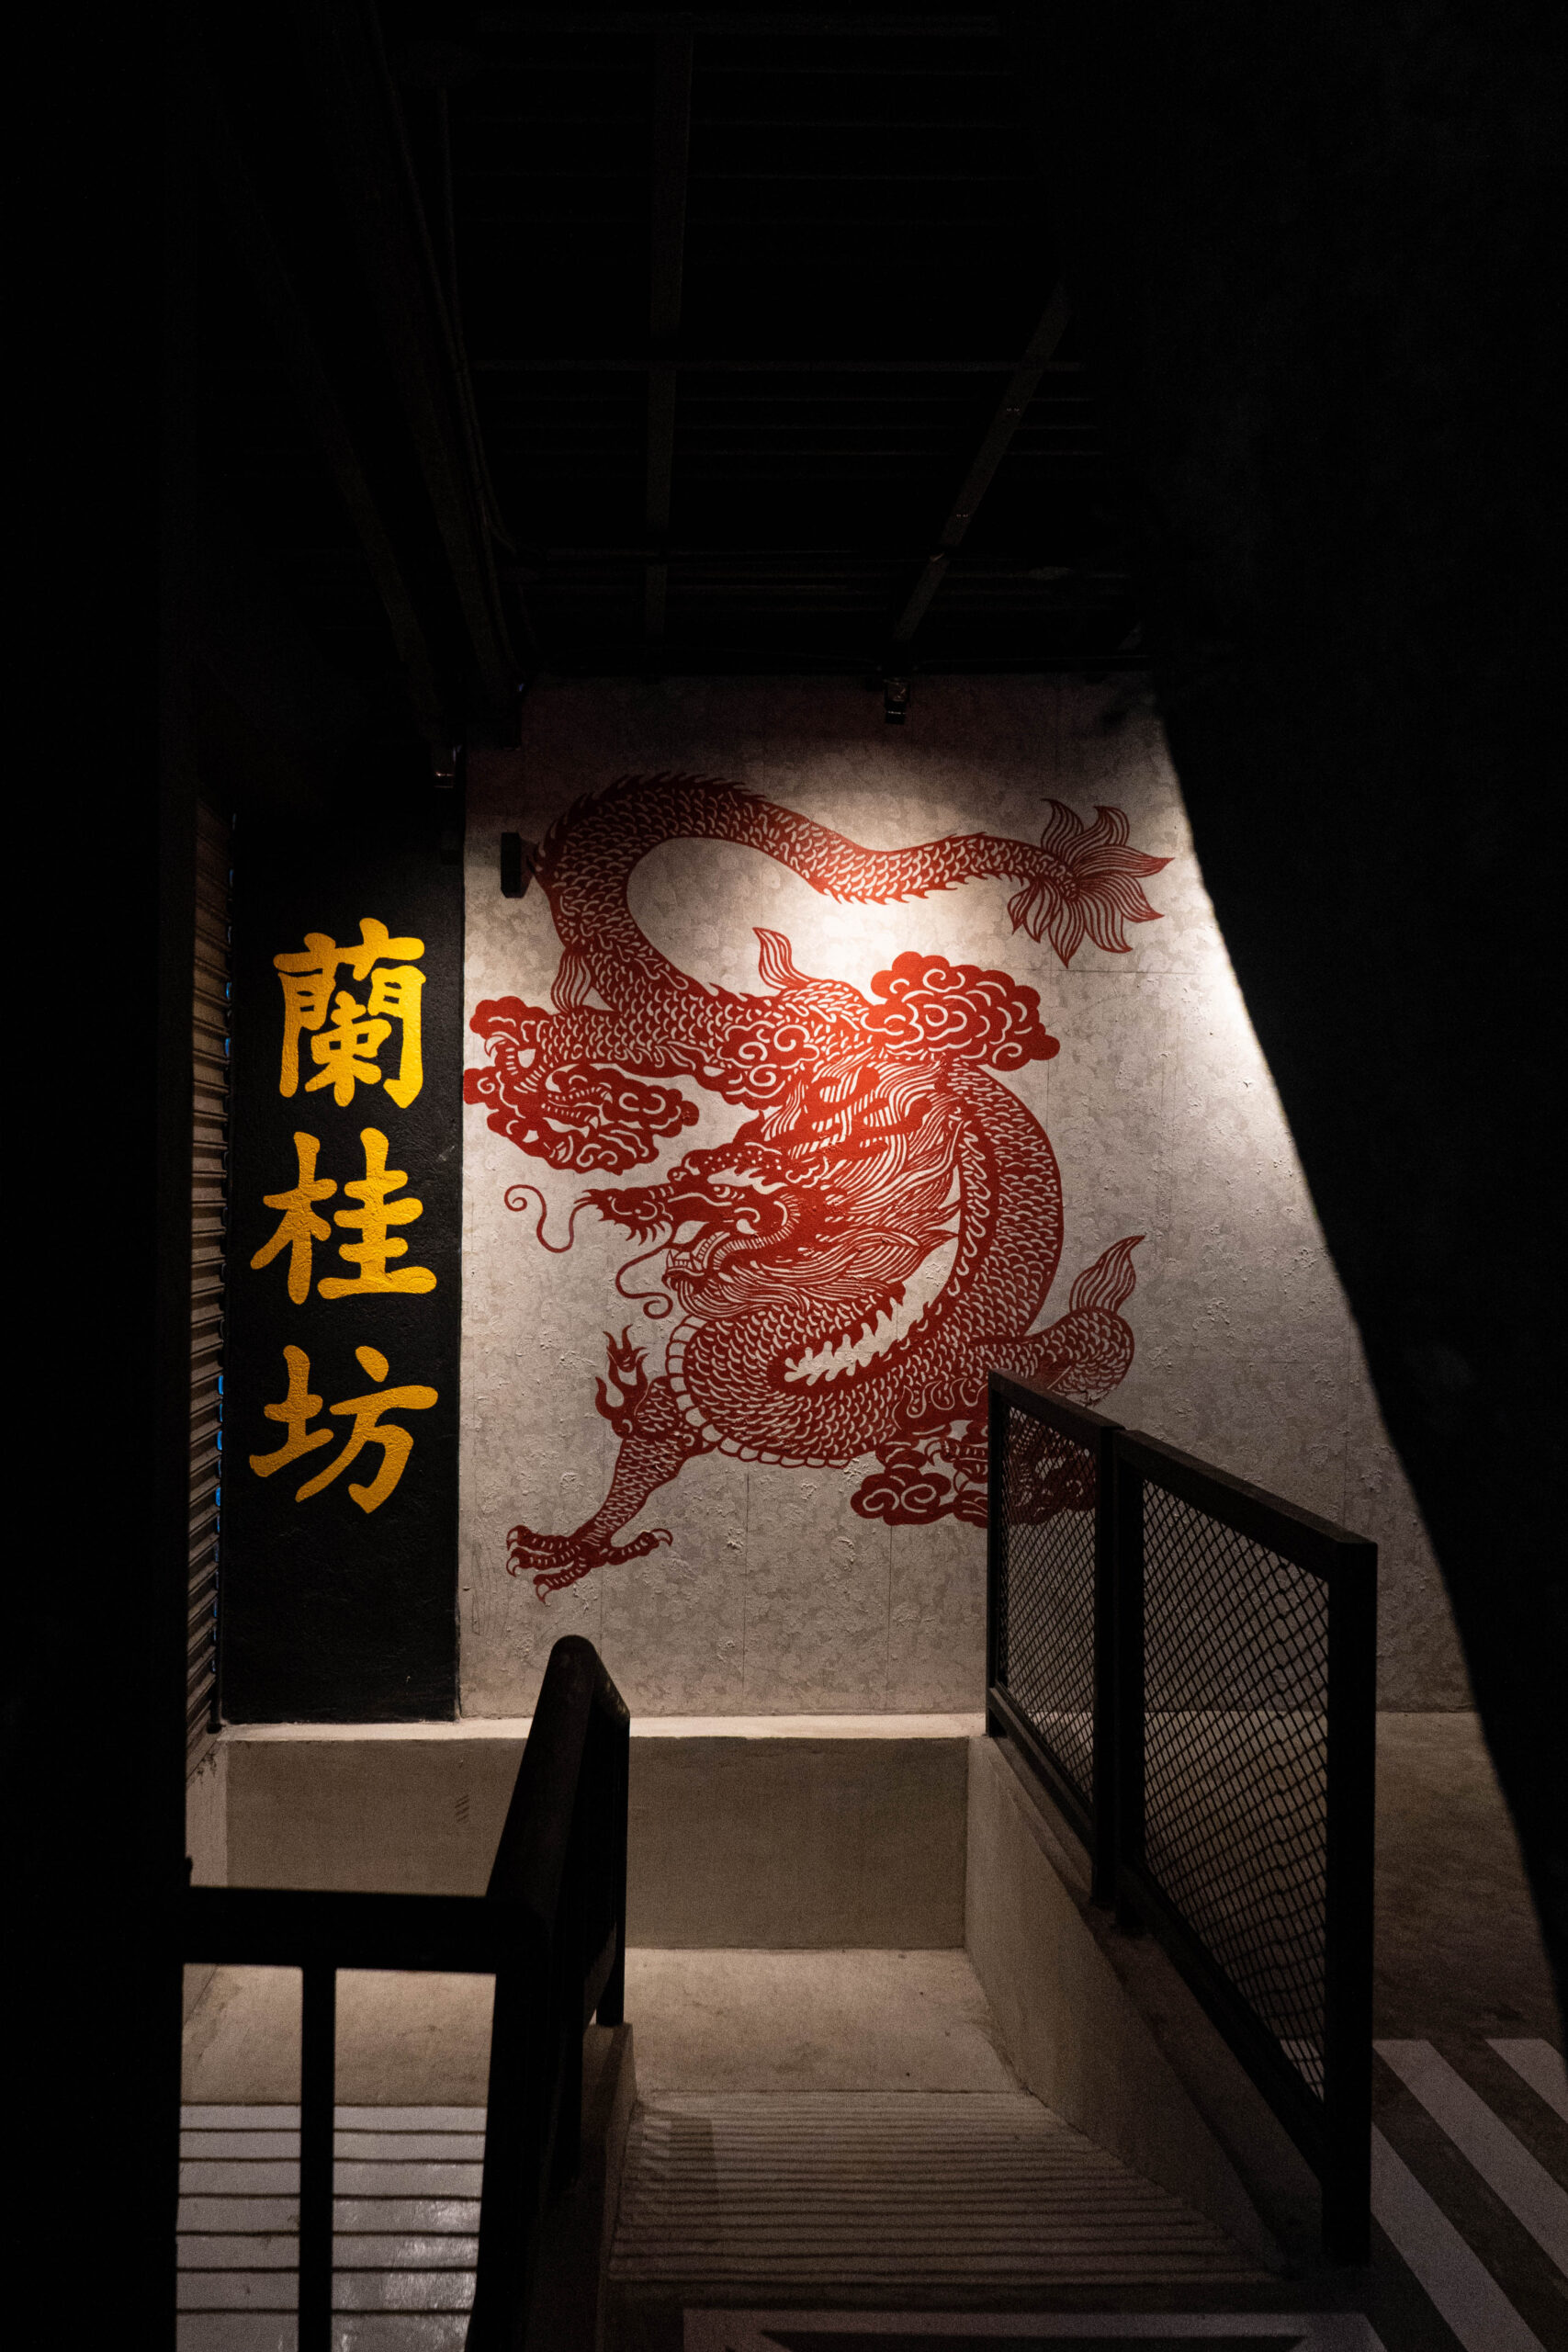 The dragon mural at the al-fresco area of Lan Kwai